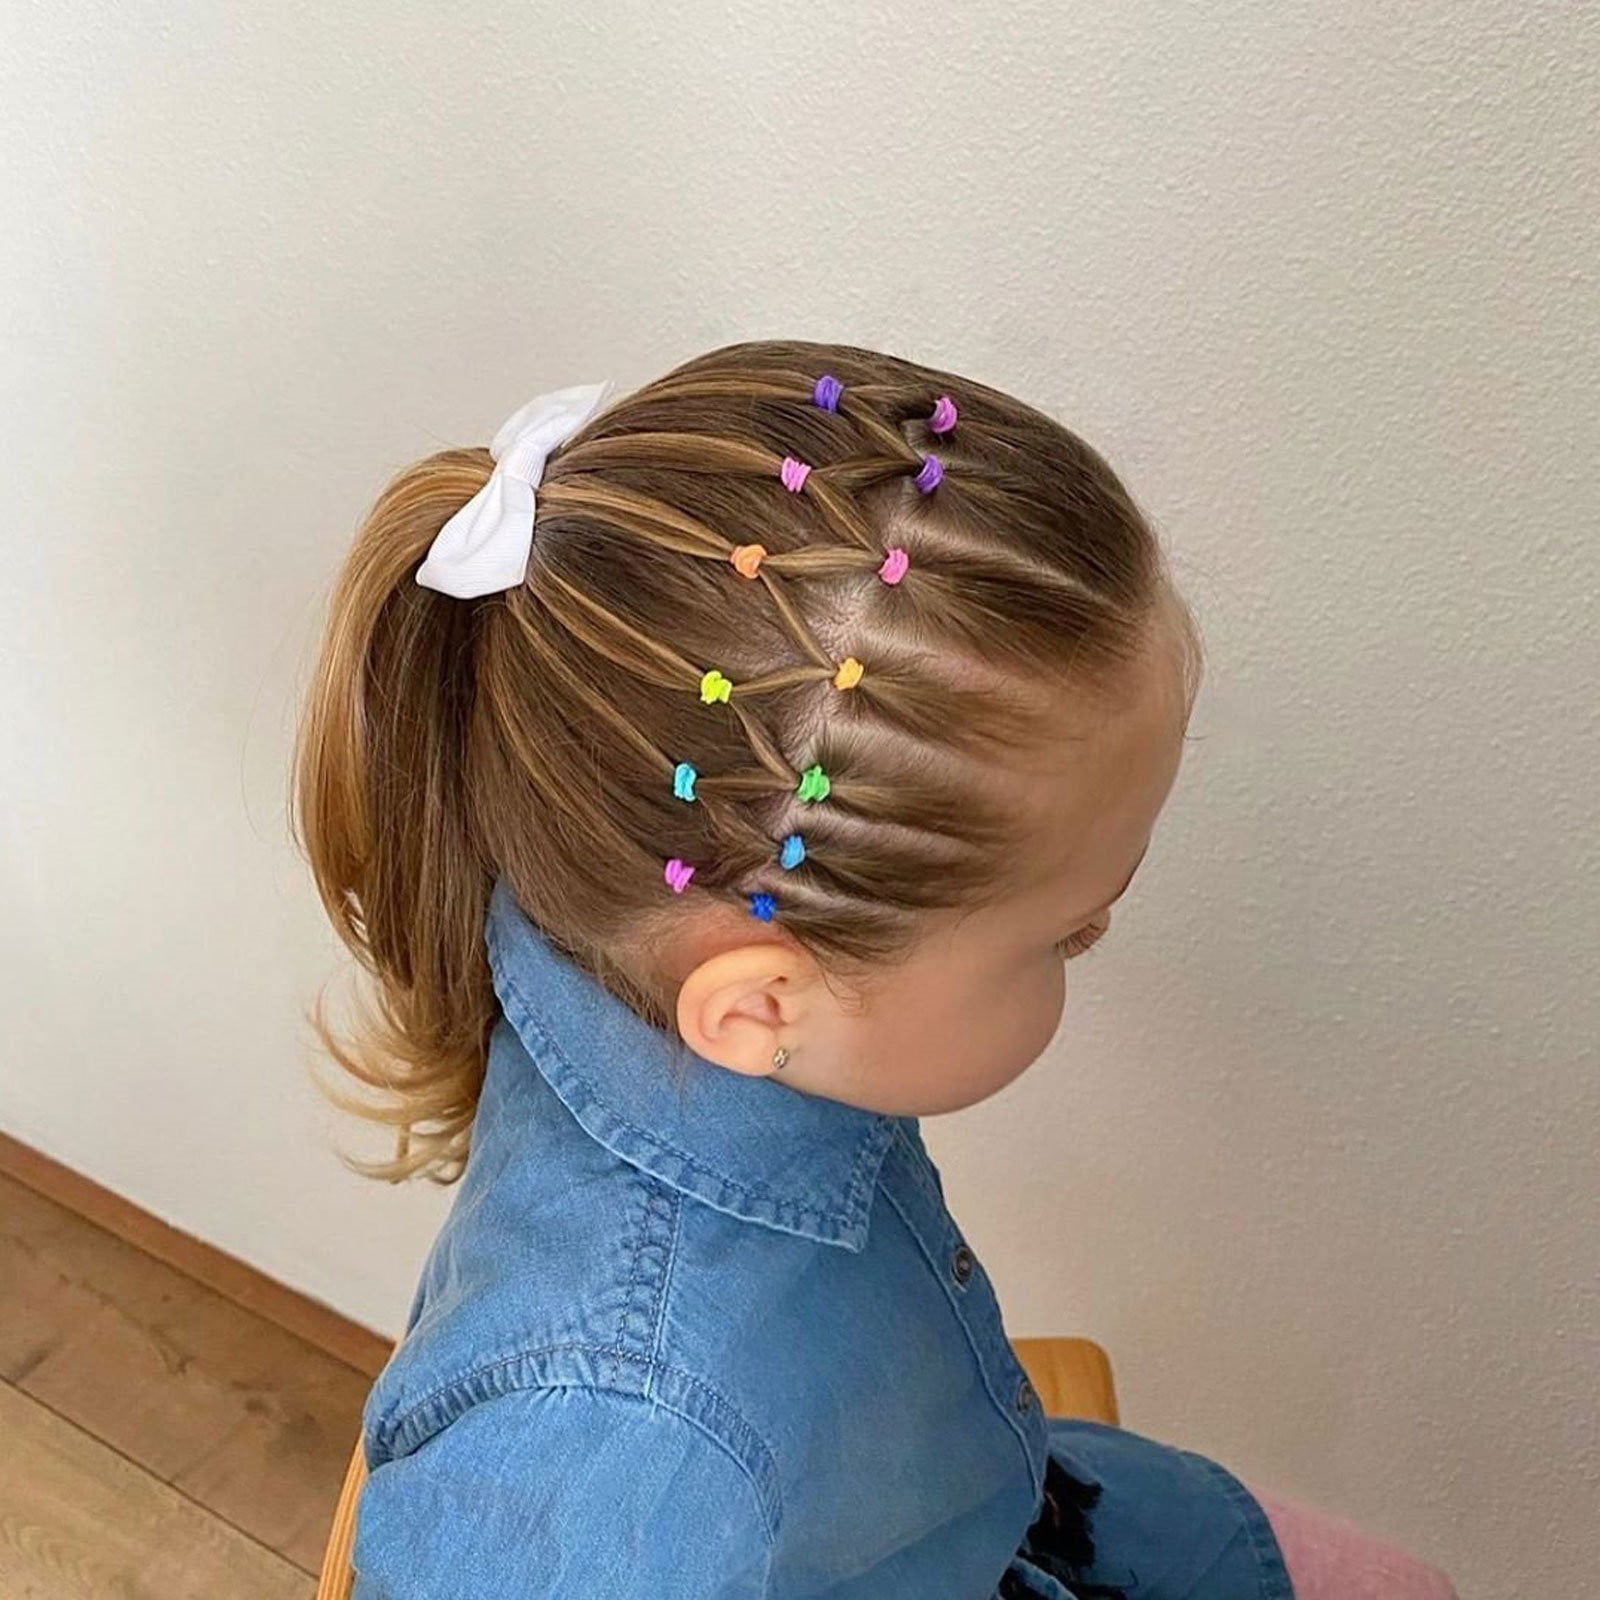 3/4â Inches Colorful Rubber Bands for Hair Ties Reusable Elastics Ponytail  Holders for Girls Kids Thick Hair Mini Braids No Damage Student on OnBuy